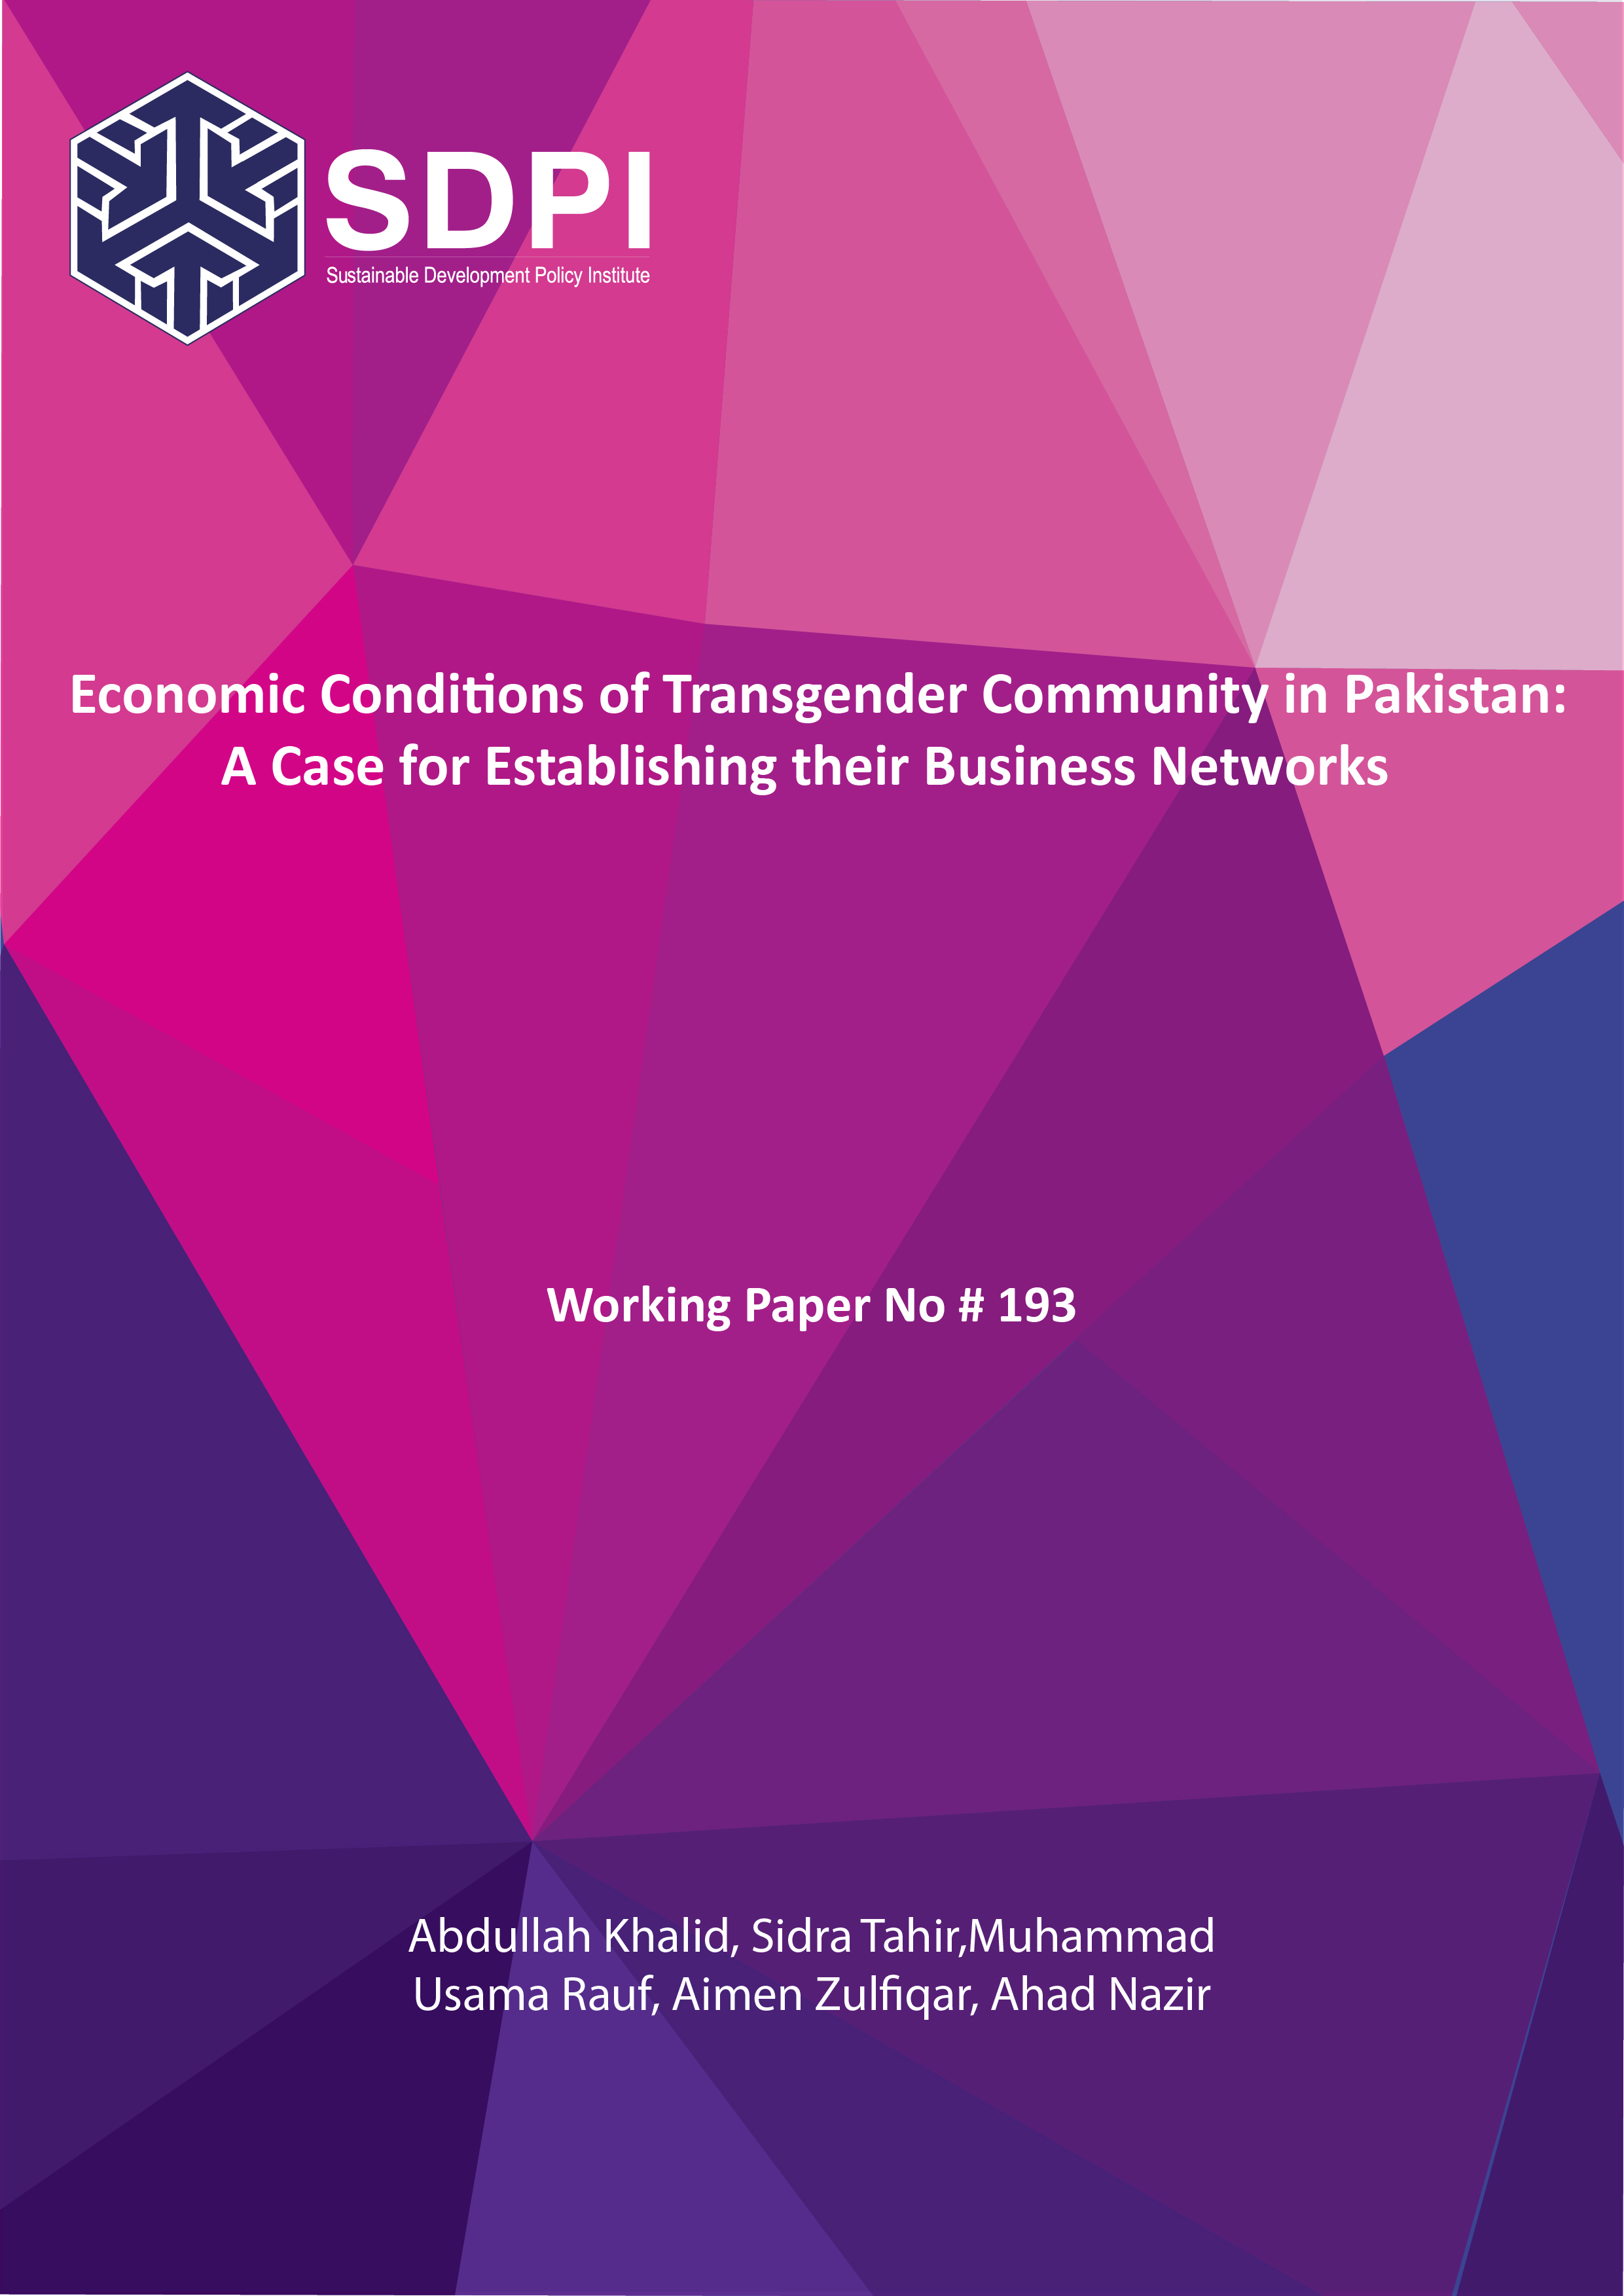 Economic Conditions of Transgender Community in Pakistan: A Case for Establishing their Business Networks